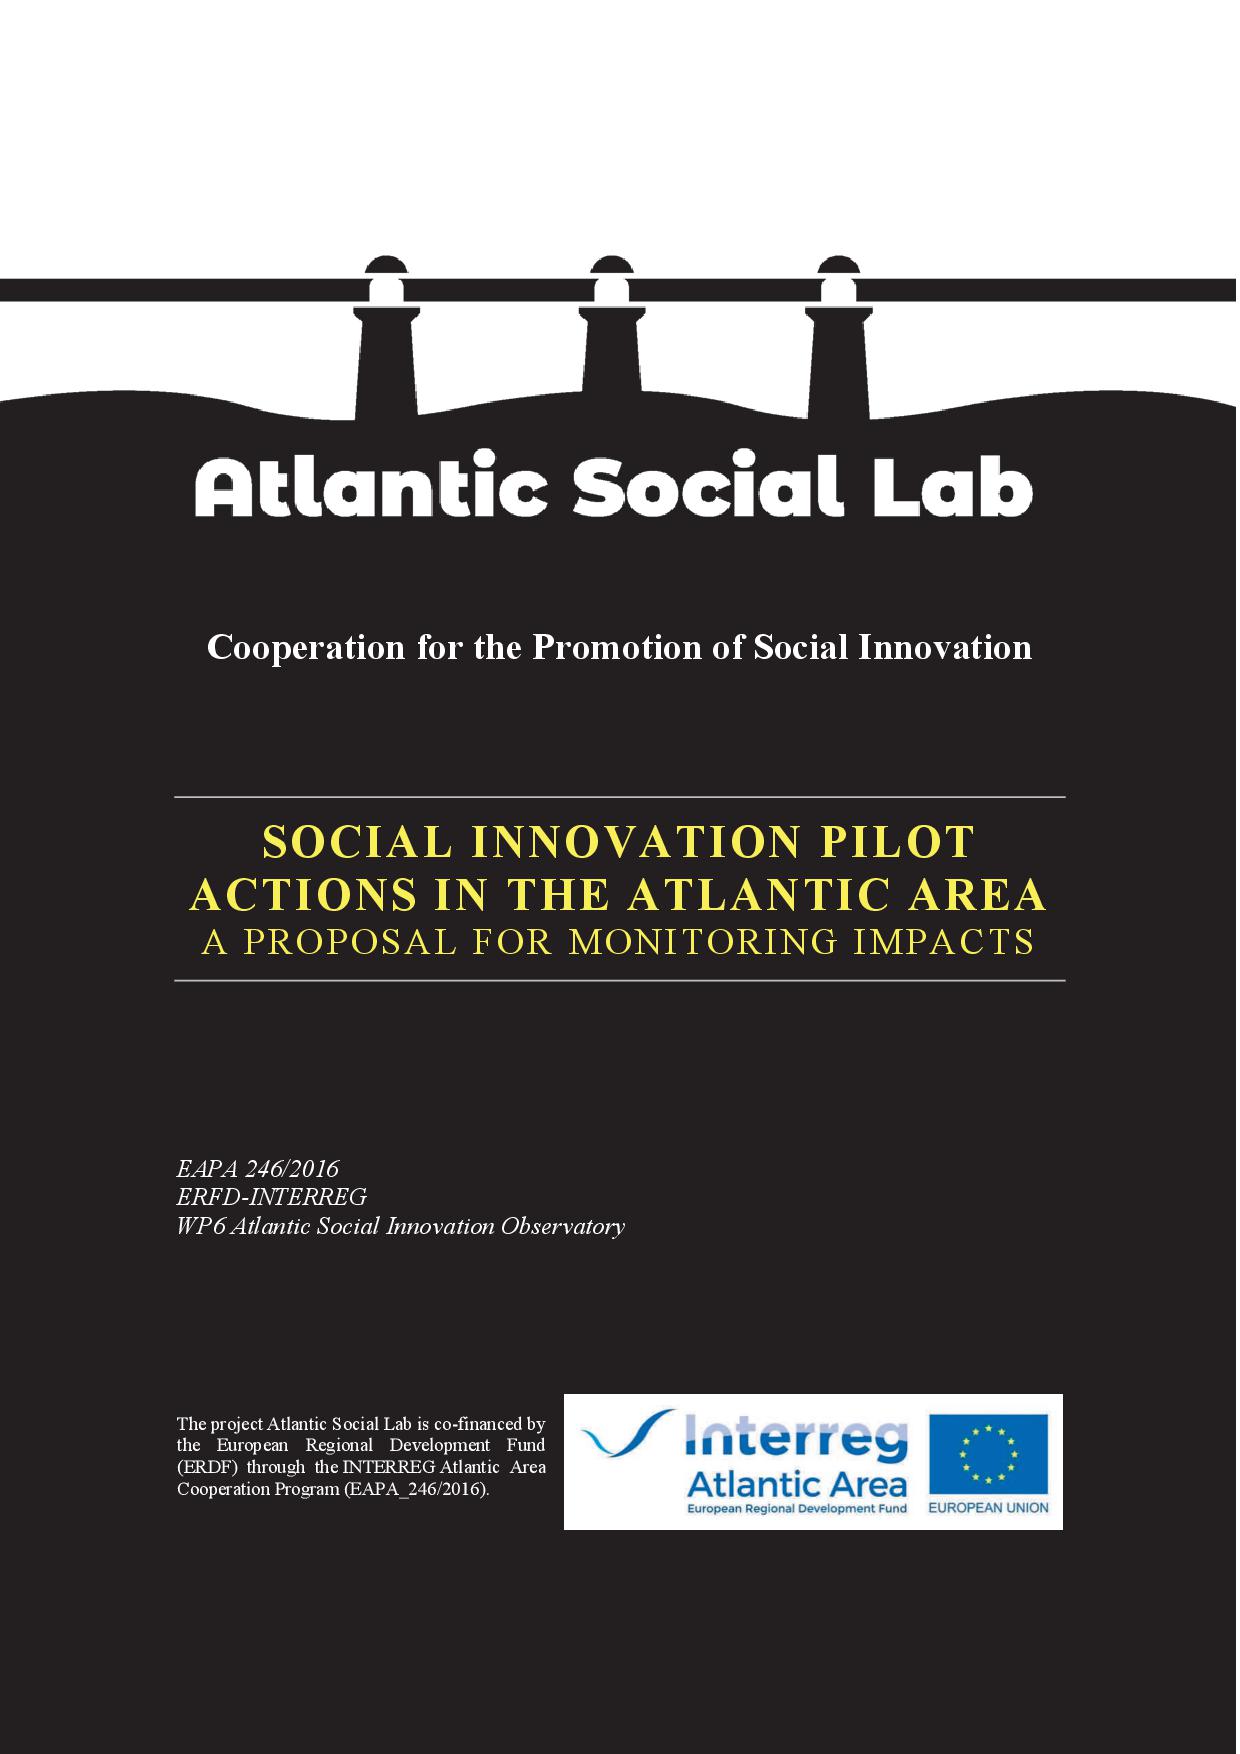 Report “Social innovation pilot actions in the Atlantic Area: a proposal for monitoring impacts”